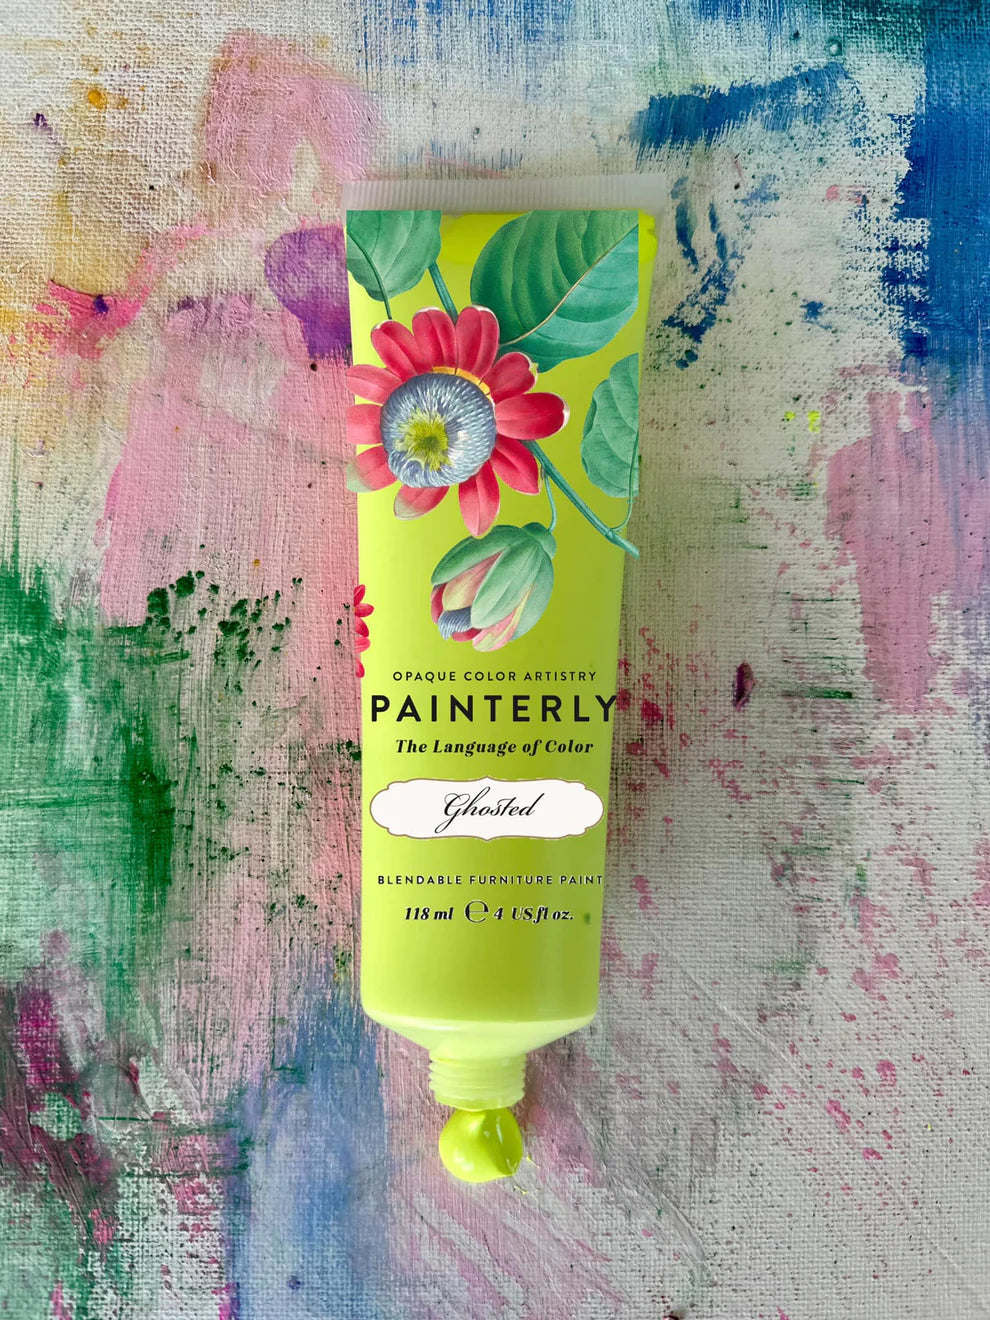 Ghosted - Painterly Collection Blendable Furniture Paint by DIY Paint